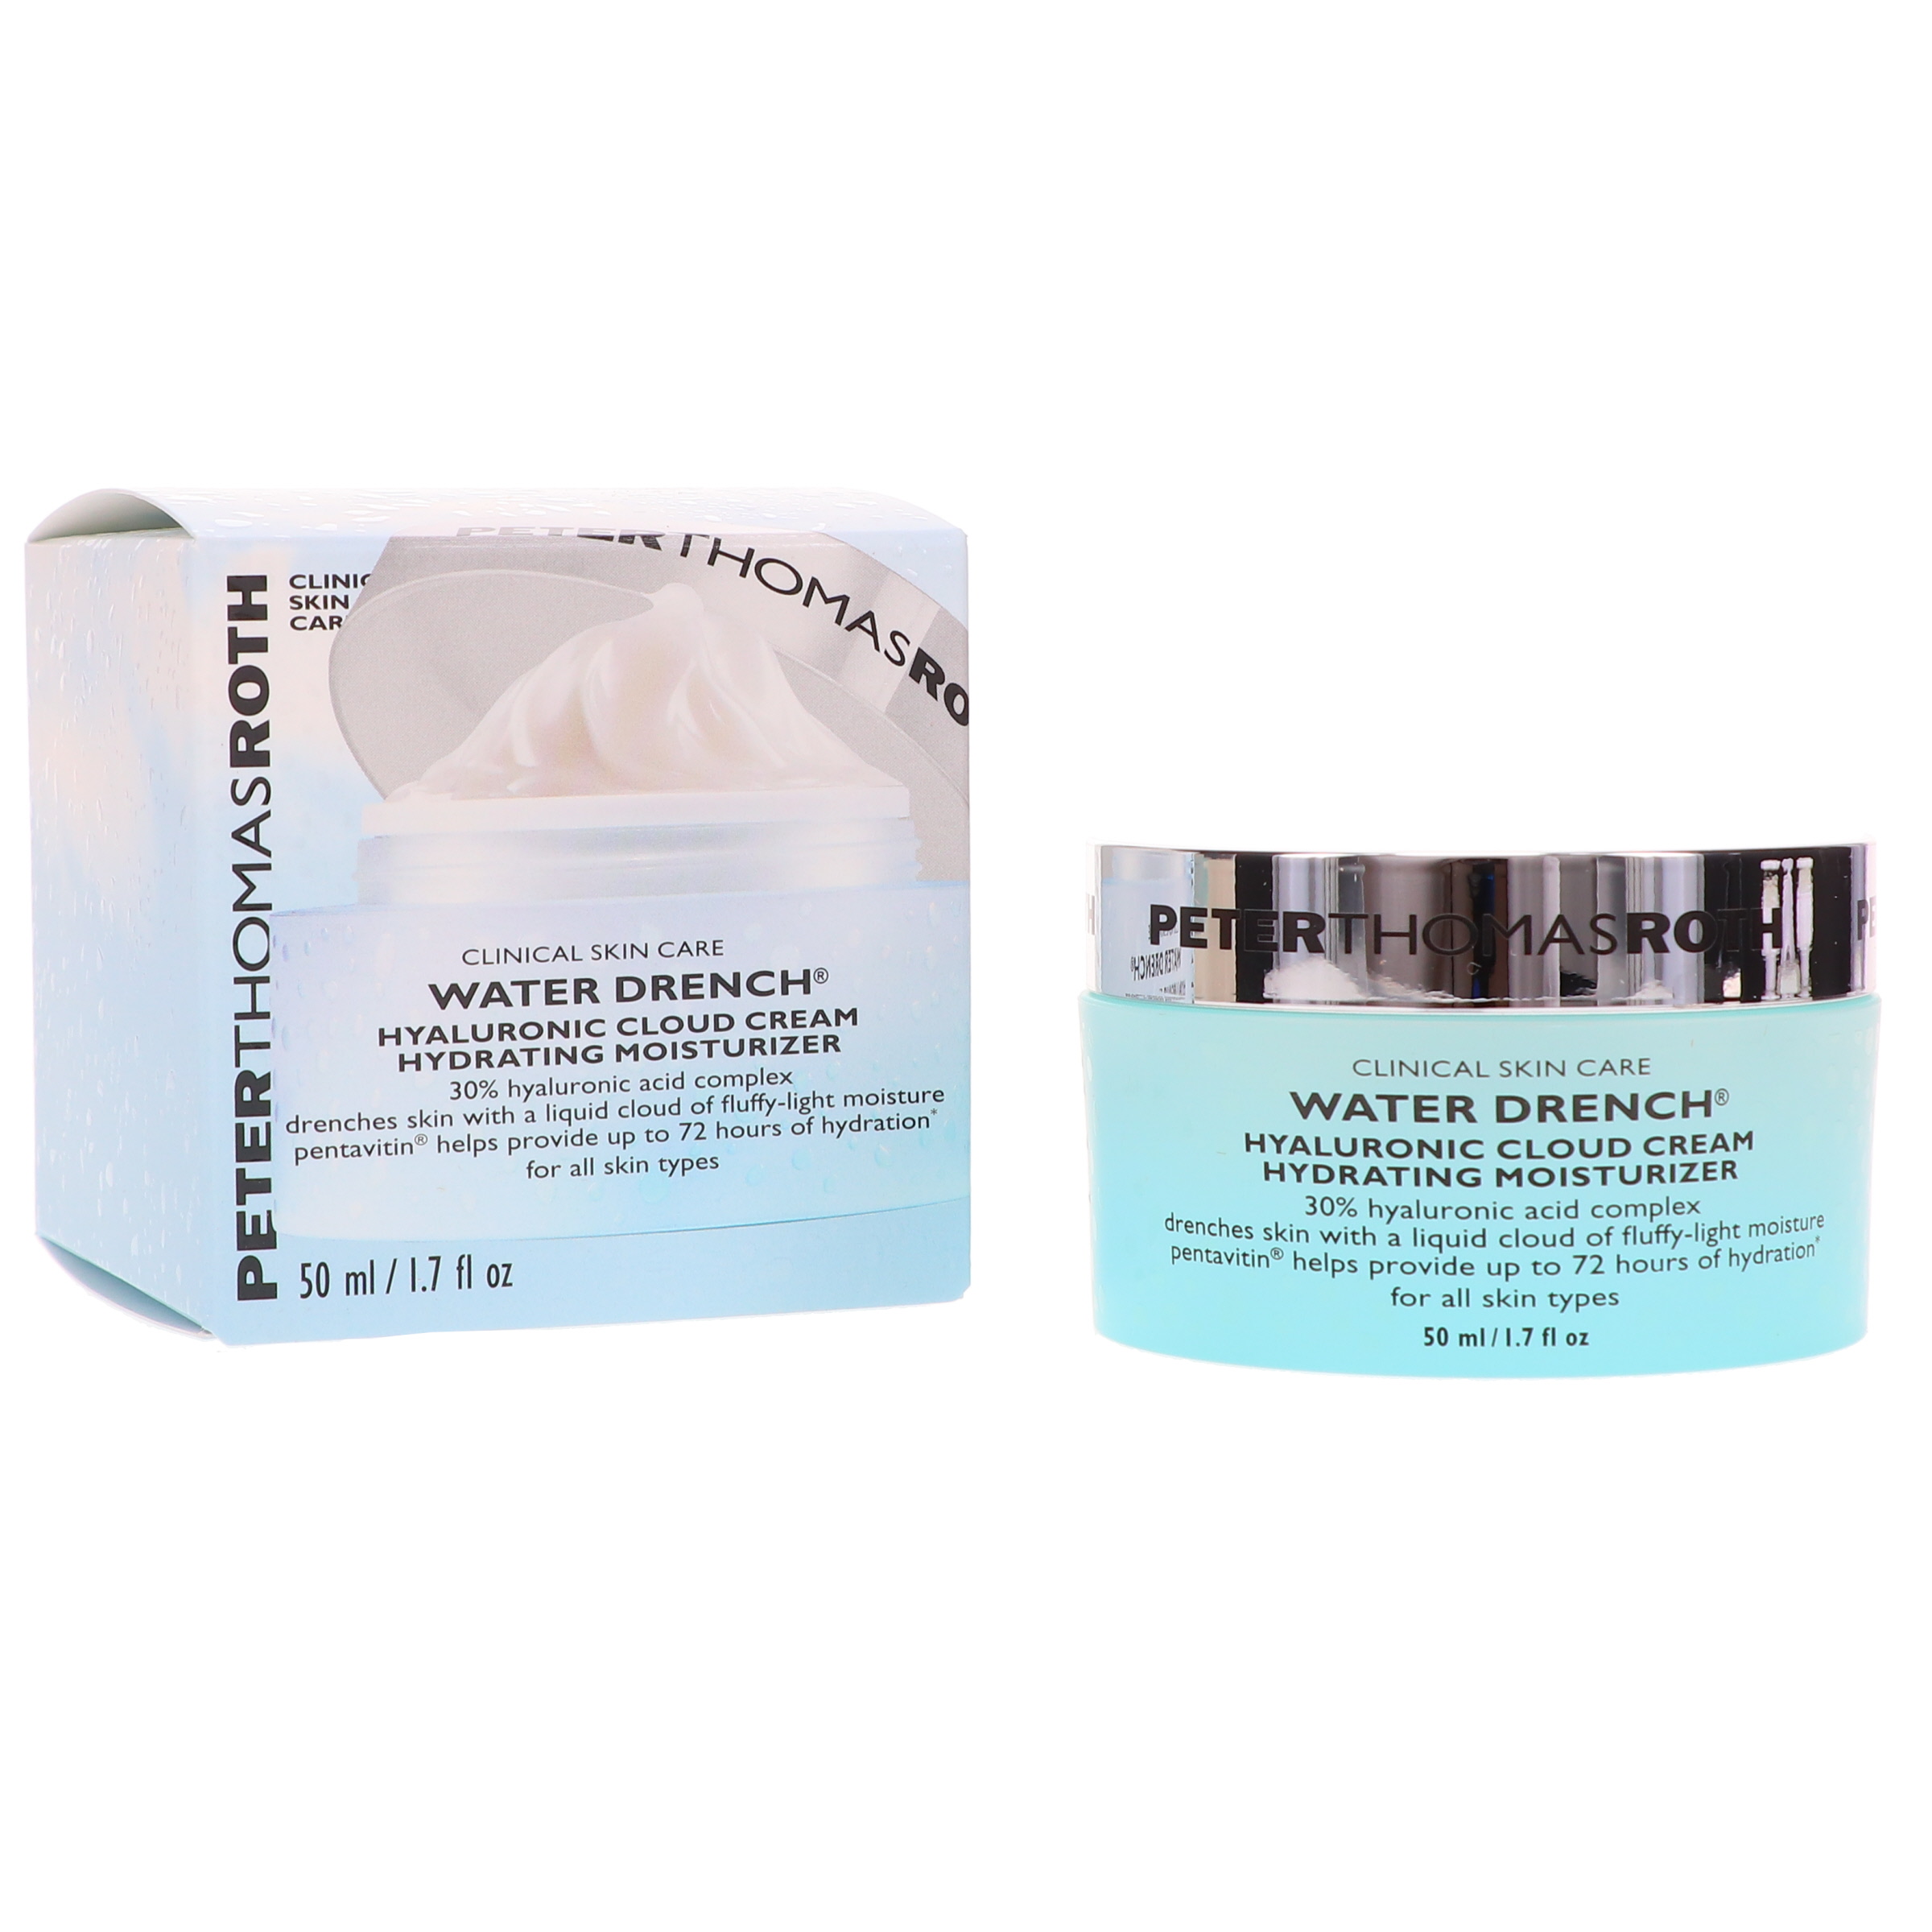 Water Drench Hyaluronic Cloud Cream - image 7 of 8